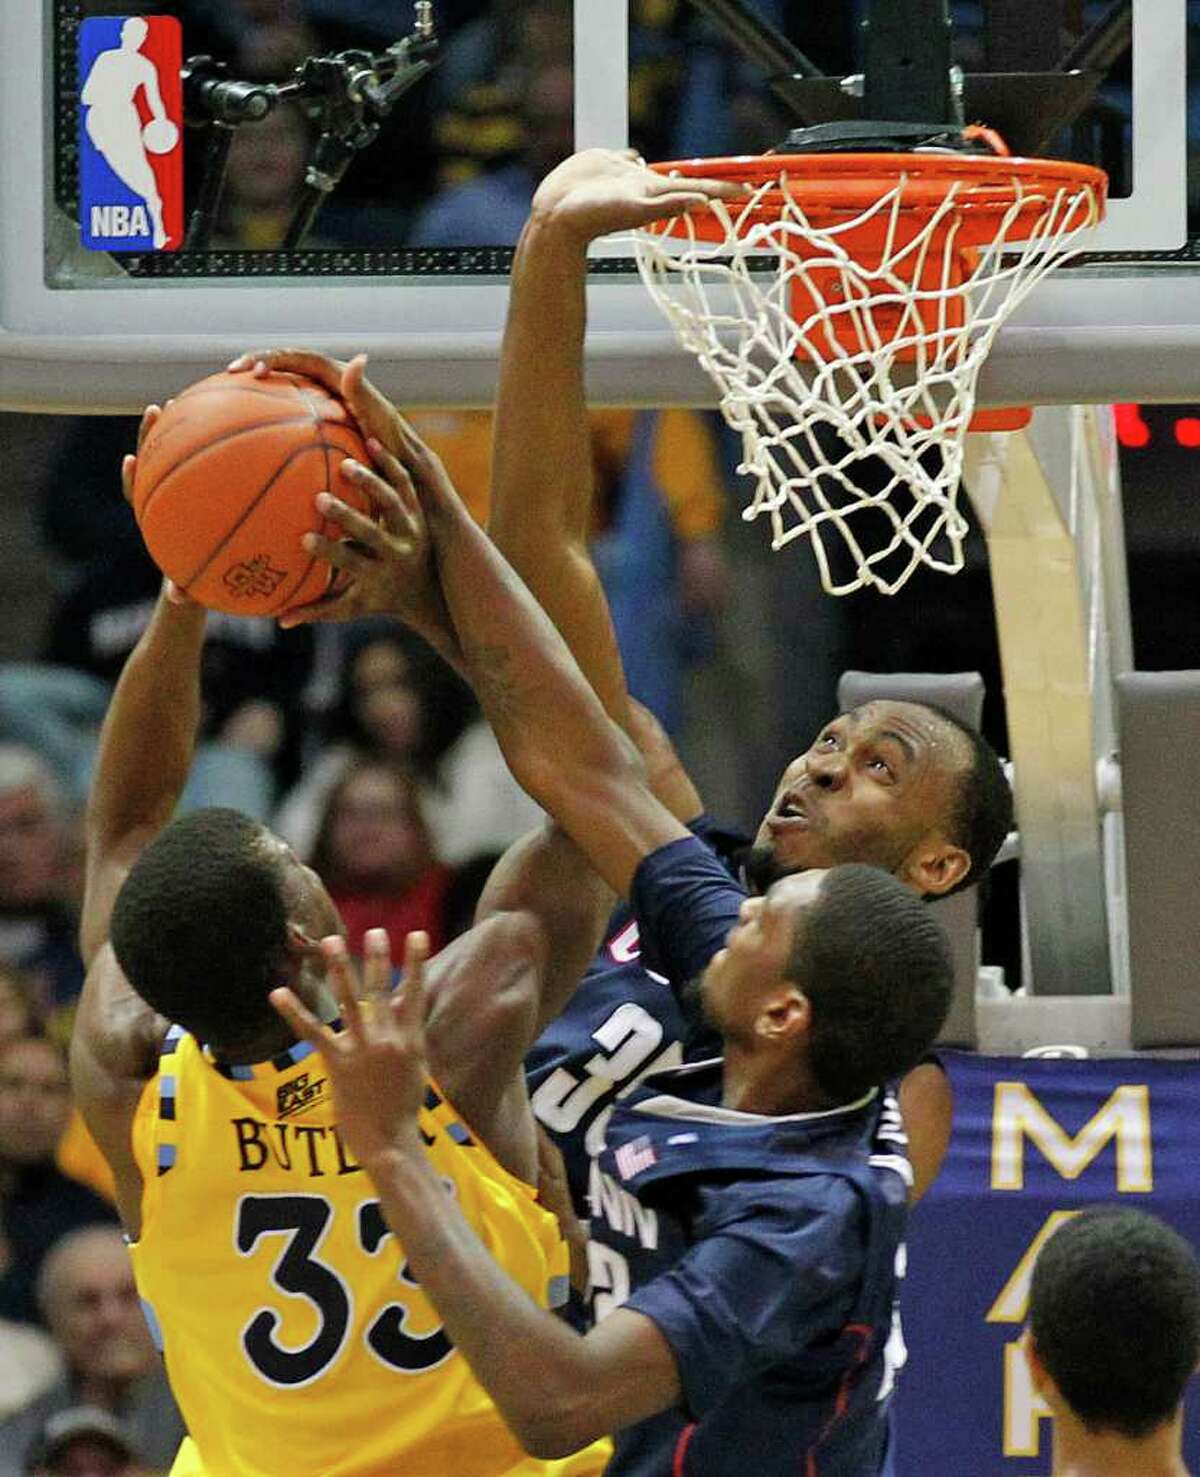 Connecticut's Charles Okwandu (35) and Roscoe Smith (22) defend against Marquette's Jimmy Butler (33) in the second half of an NCAA college basketball game Tuesday, Jan. 25, 2011, in Milwaukee. (AP Photo/Jeffrey Phelps)